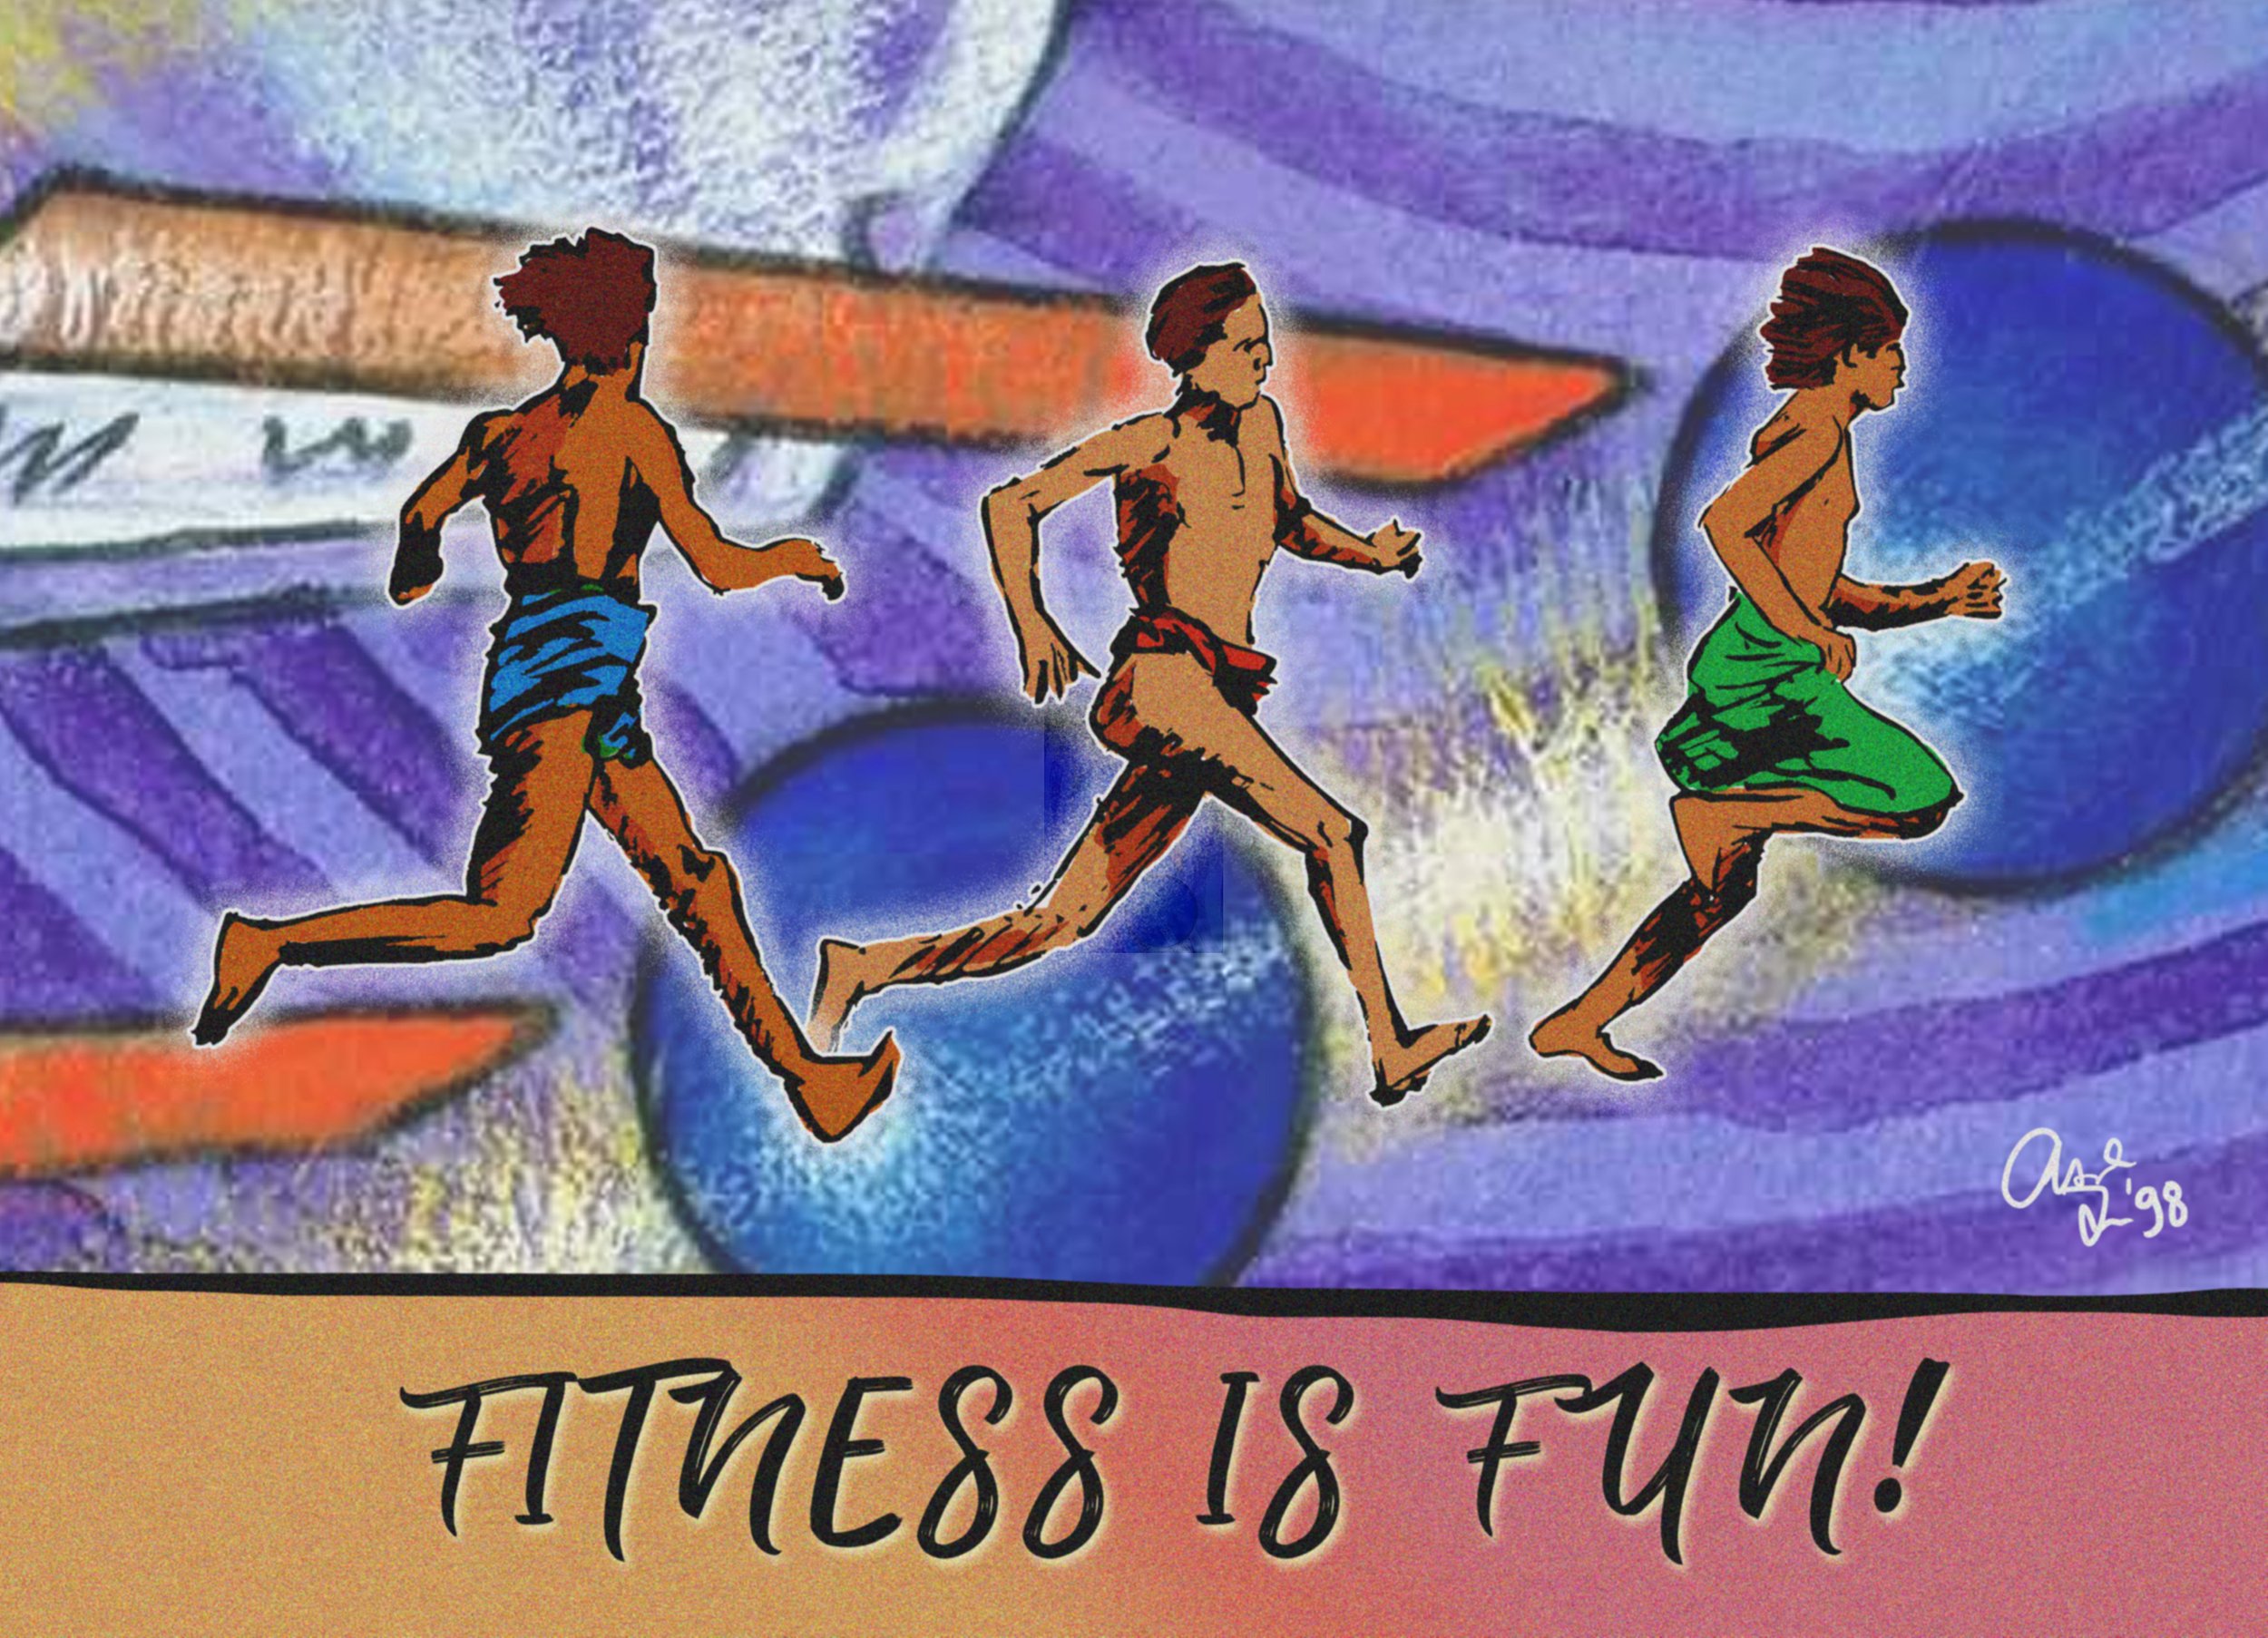 Fitness is Fun Poster